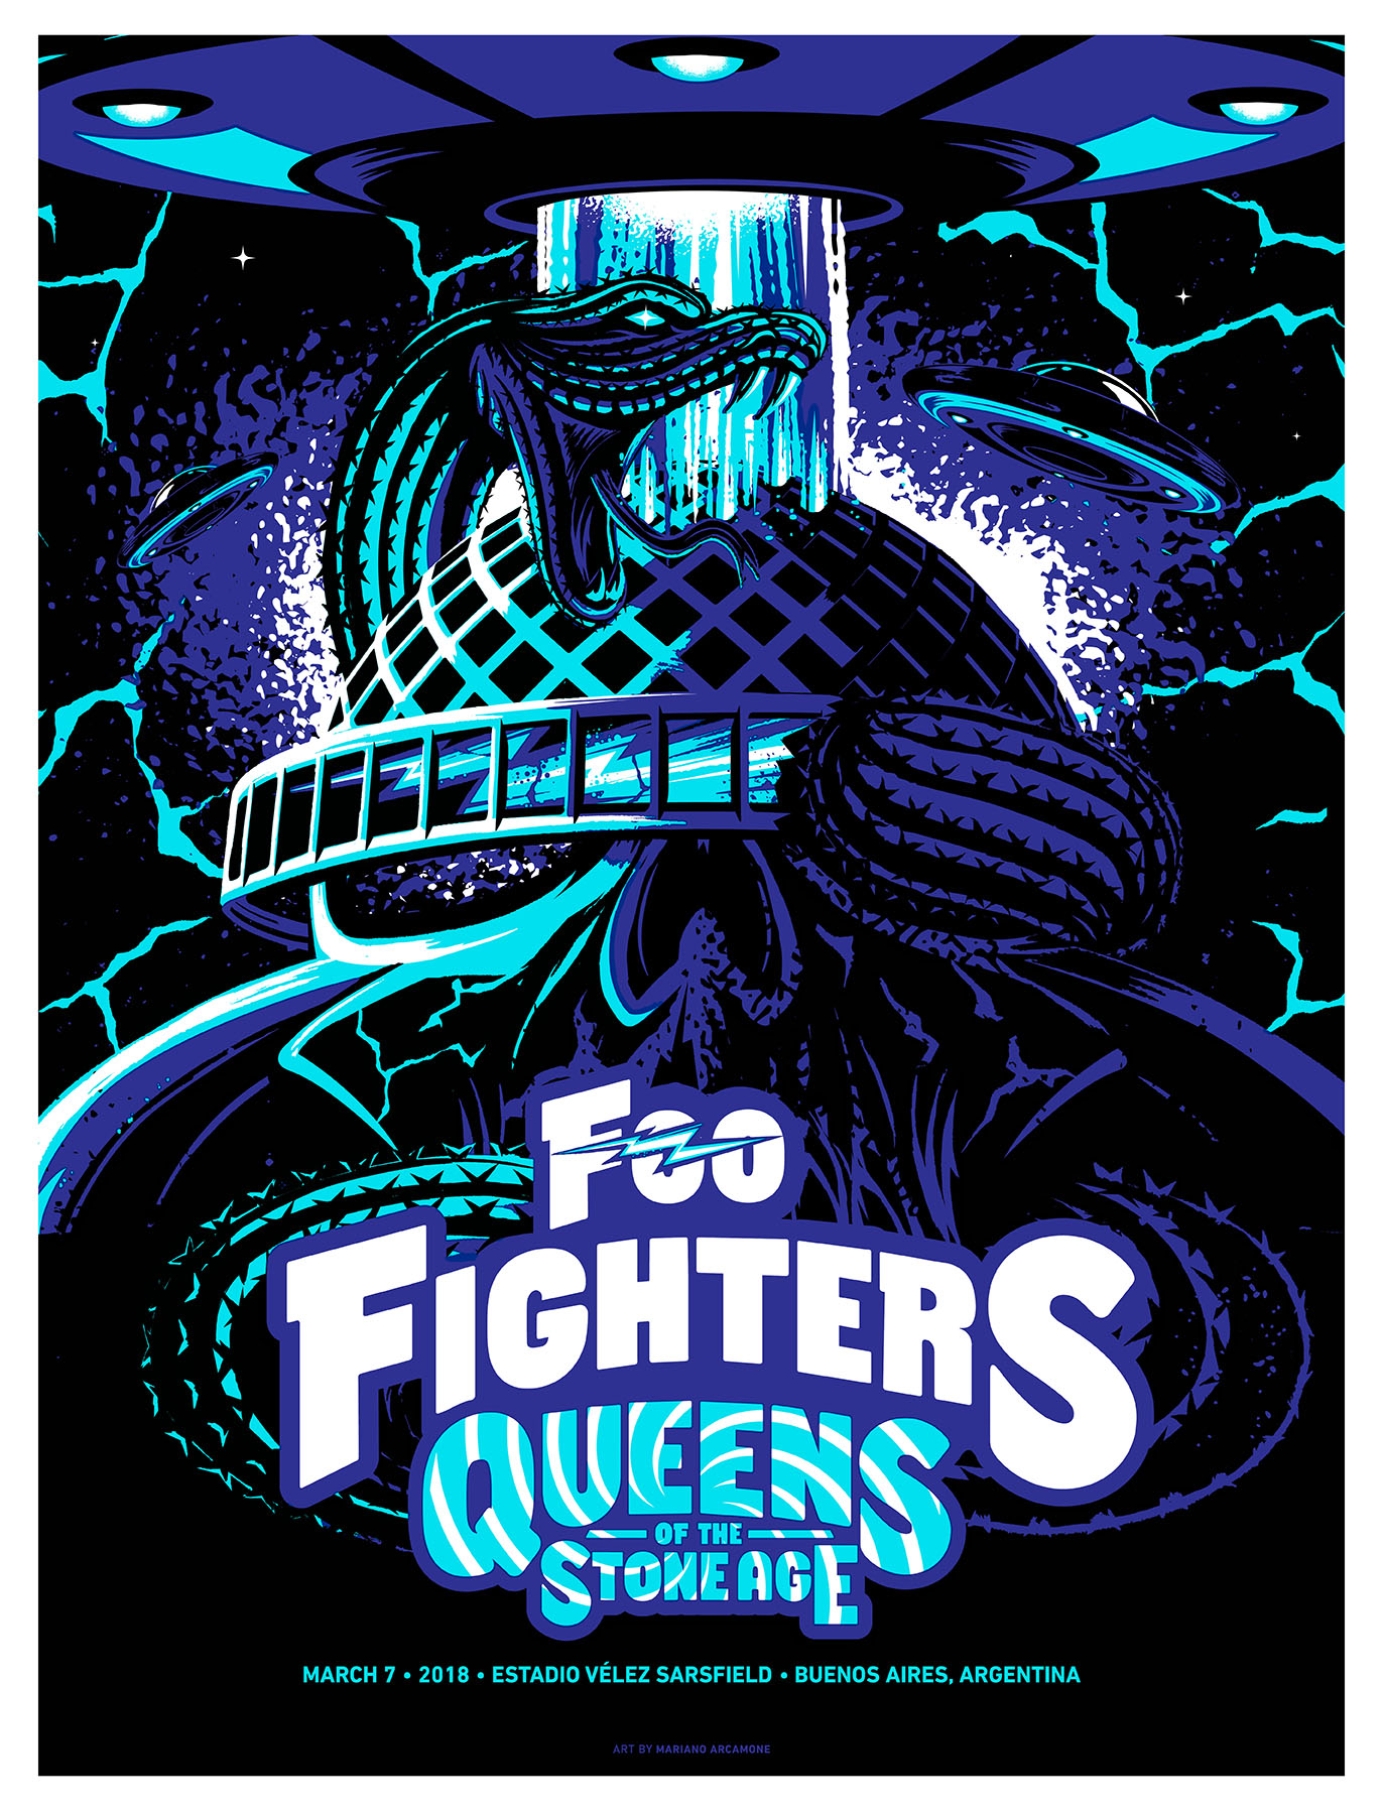 Merchandise for Foo Fighters, Queens of the Stone Age